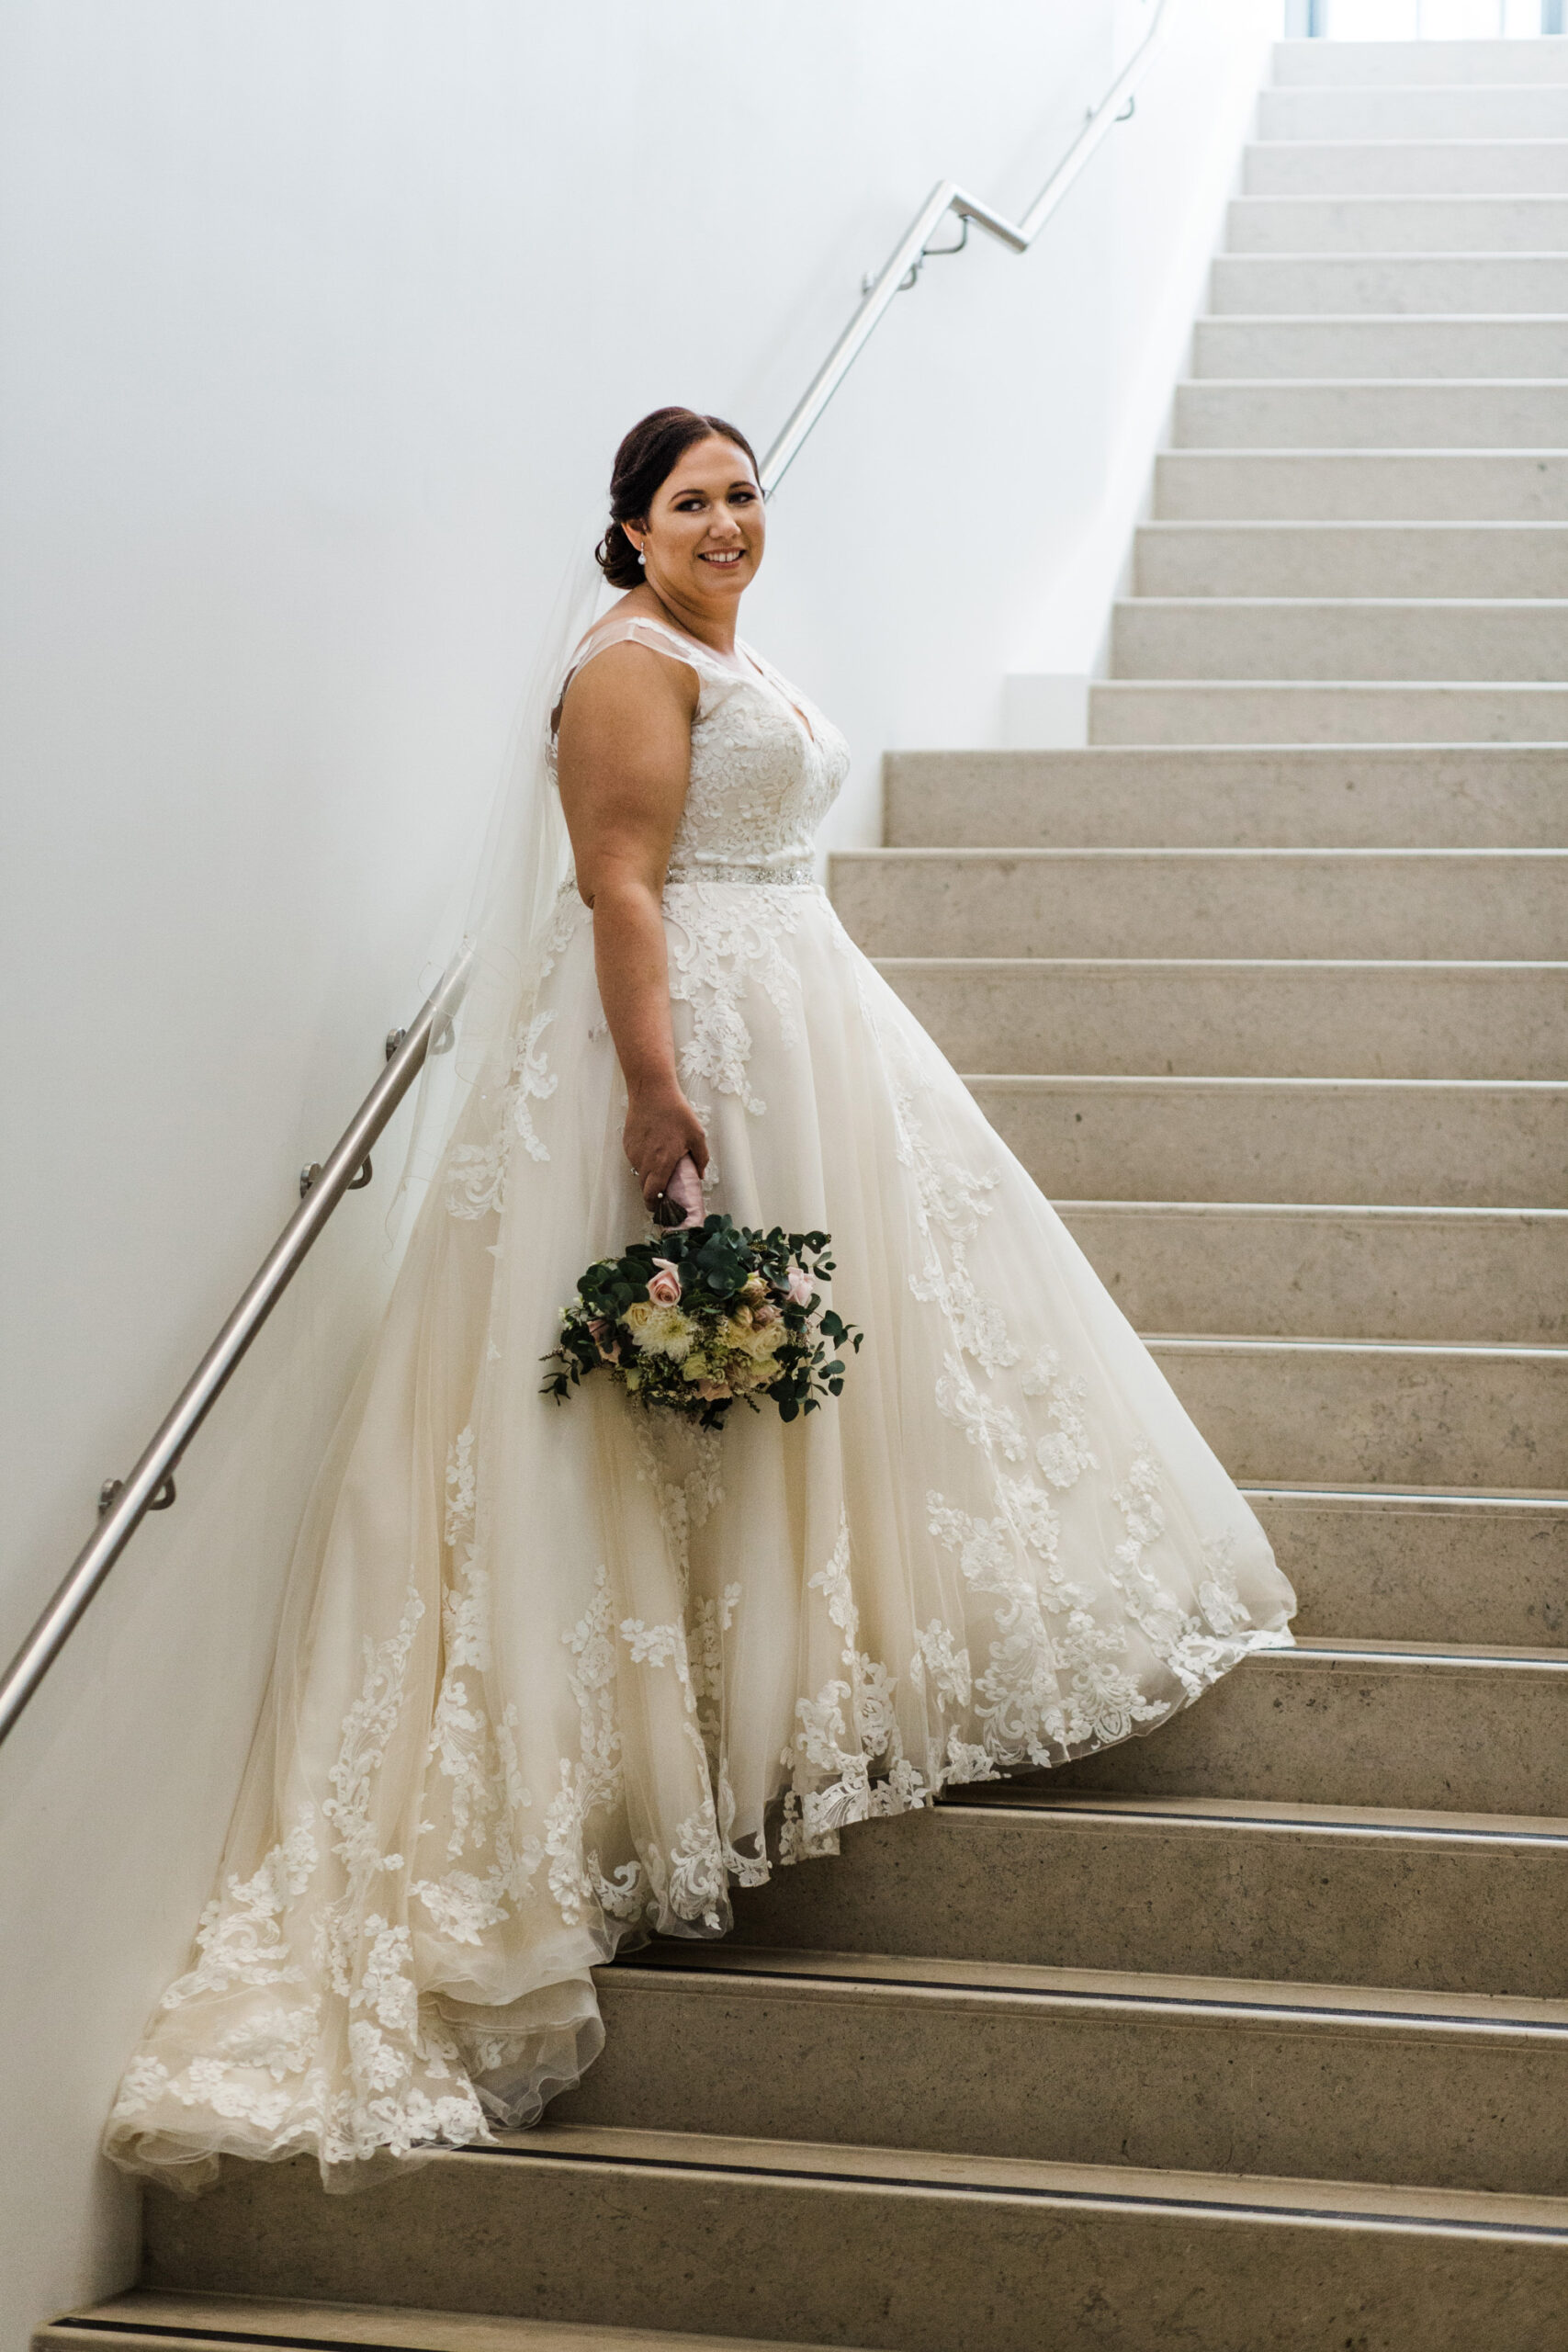 Sophie_Ambrose_Simple-Elegant-Wedding_This-is-Life-Photography_SBS_014